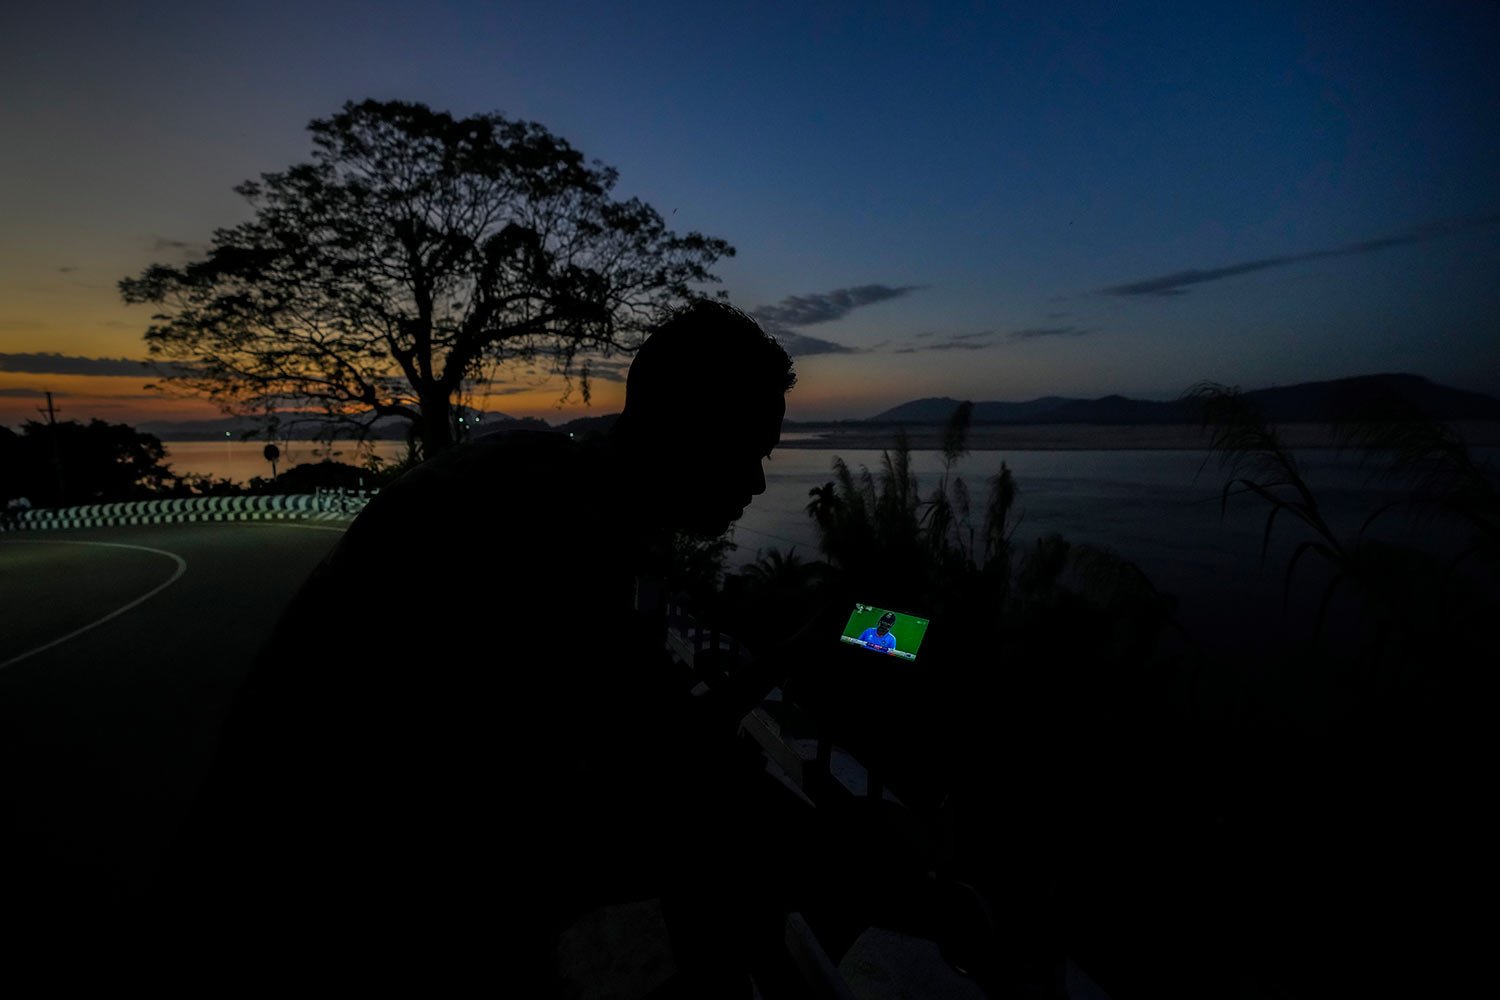  A man watches the ICC Men's Cricket World Cup final match between Australia and India on his mobile phone along the river Brahmaputra in Guwahati, India, Sunday, Nov. 19, 2023. (AP Photo/Anupam Nath) 